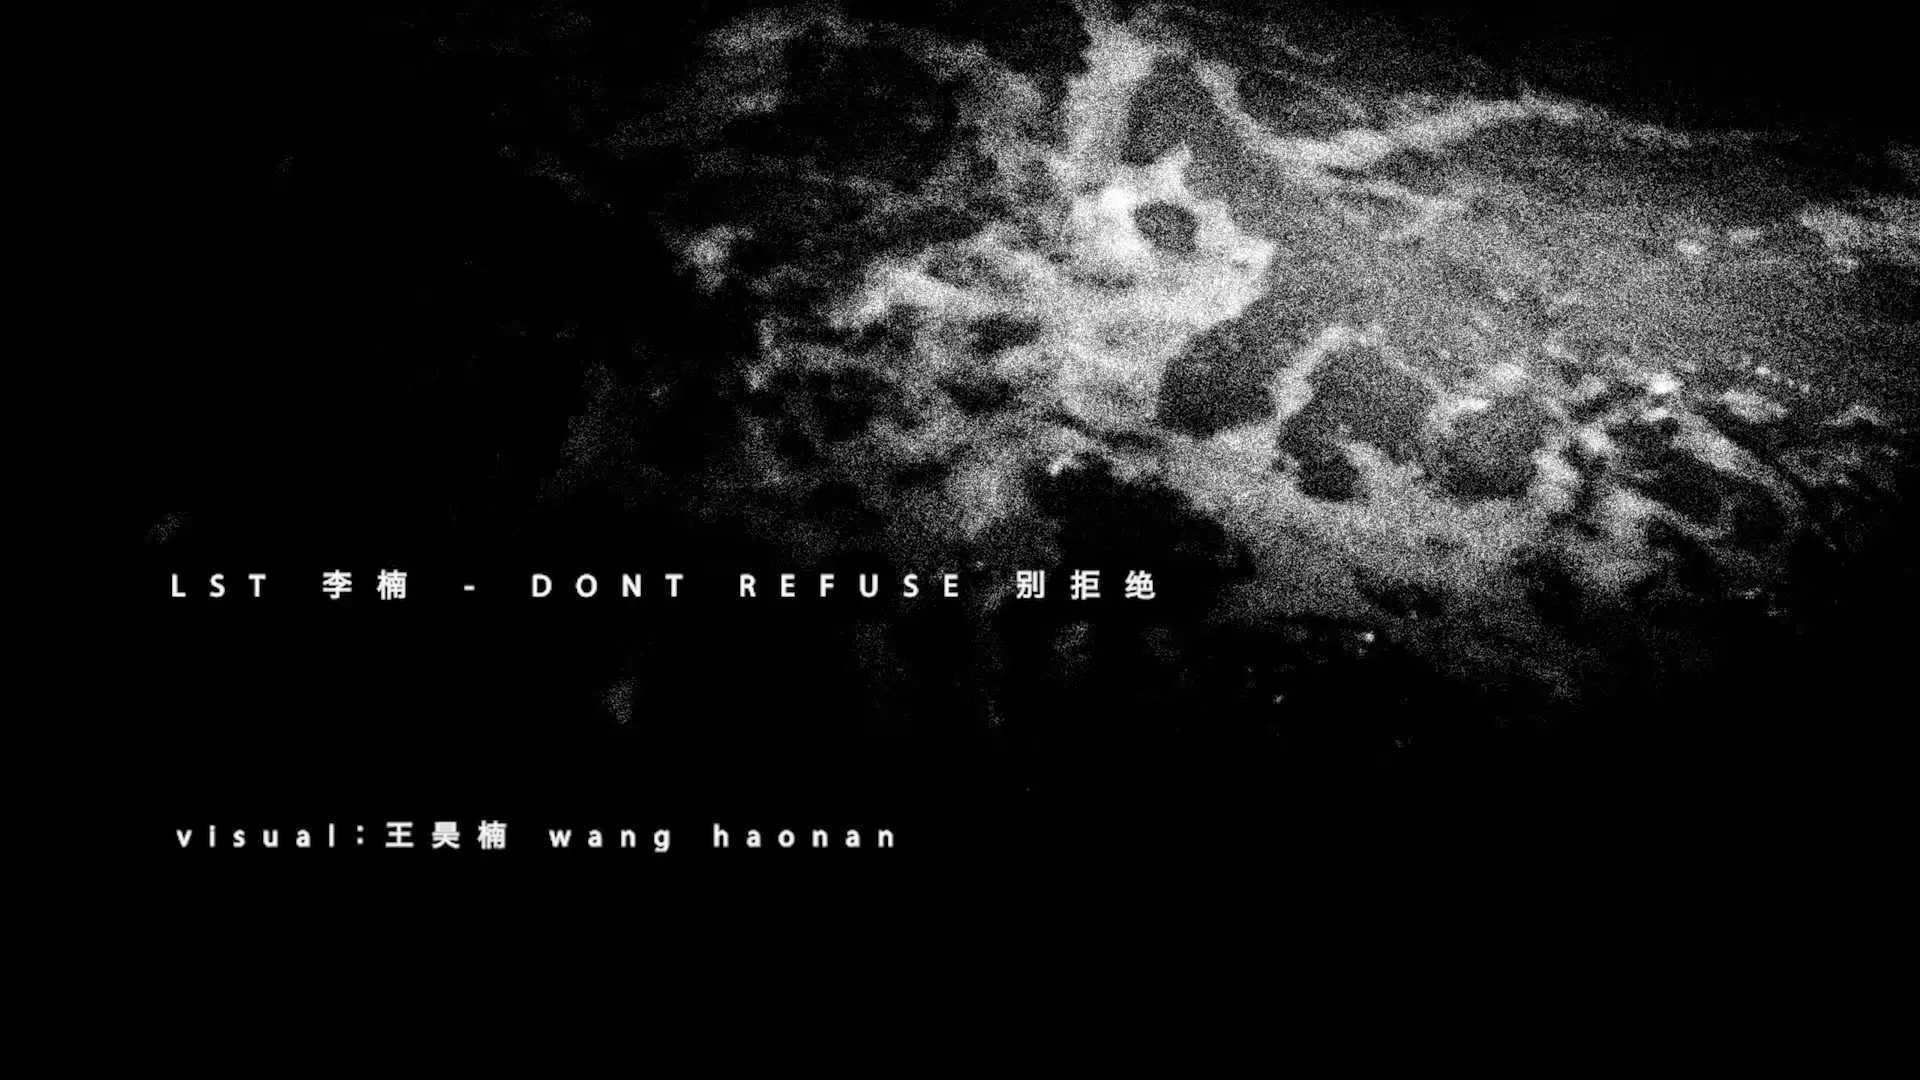 LST李楠 - DON'T REFUSE 别拒绝